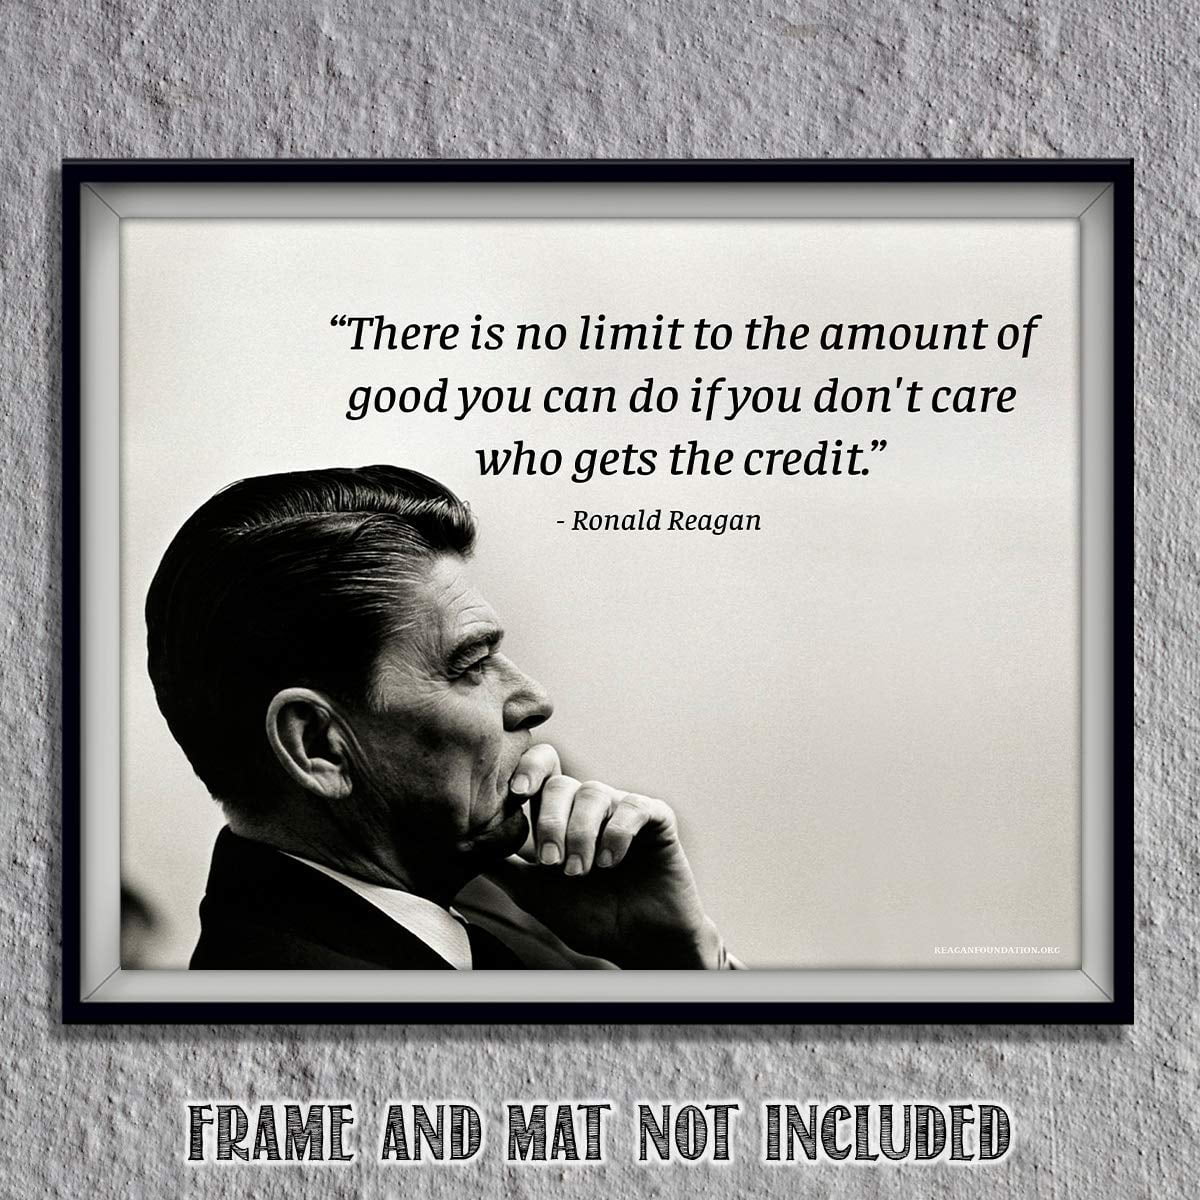 Poster or Framed Ronald Reagan Picture "No Limit to the Amount of Good" Quote 